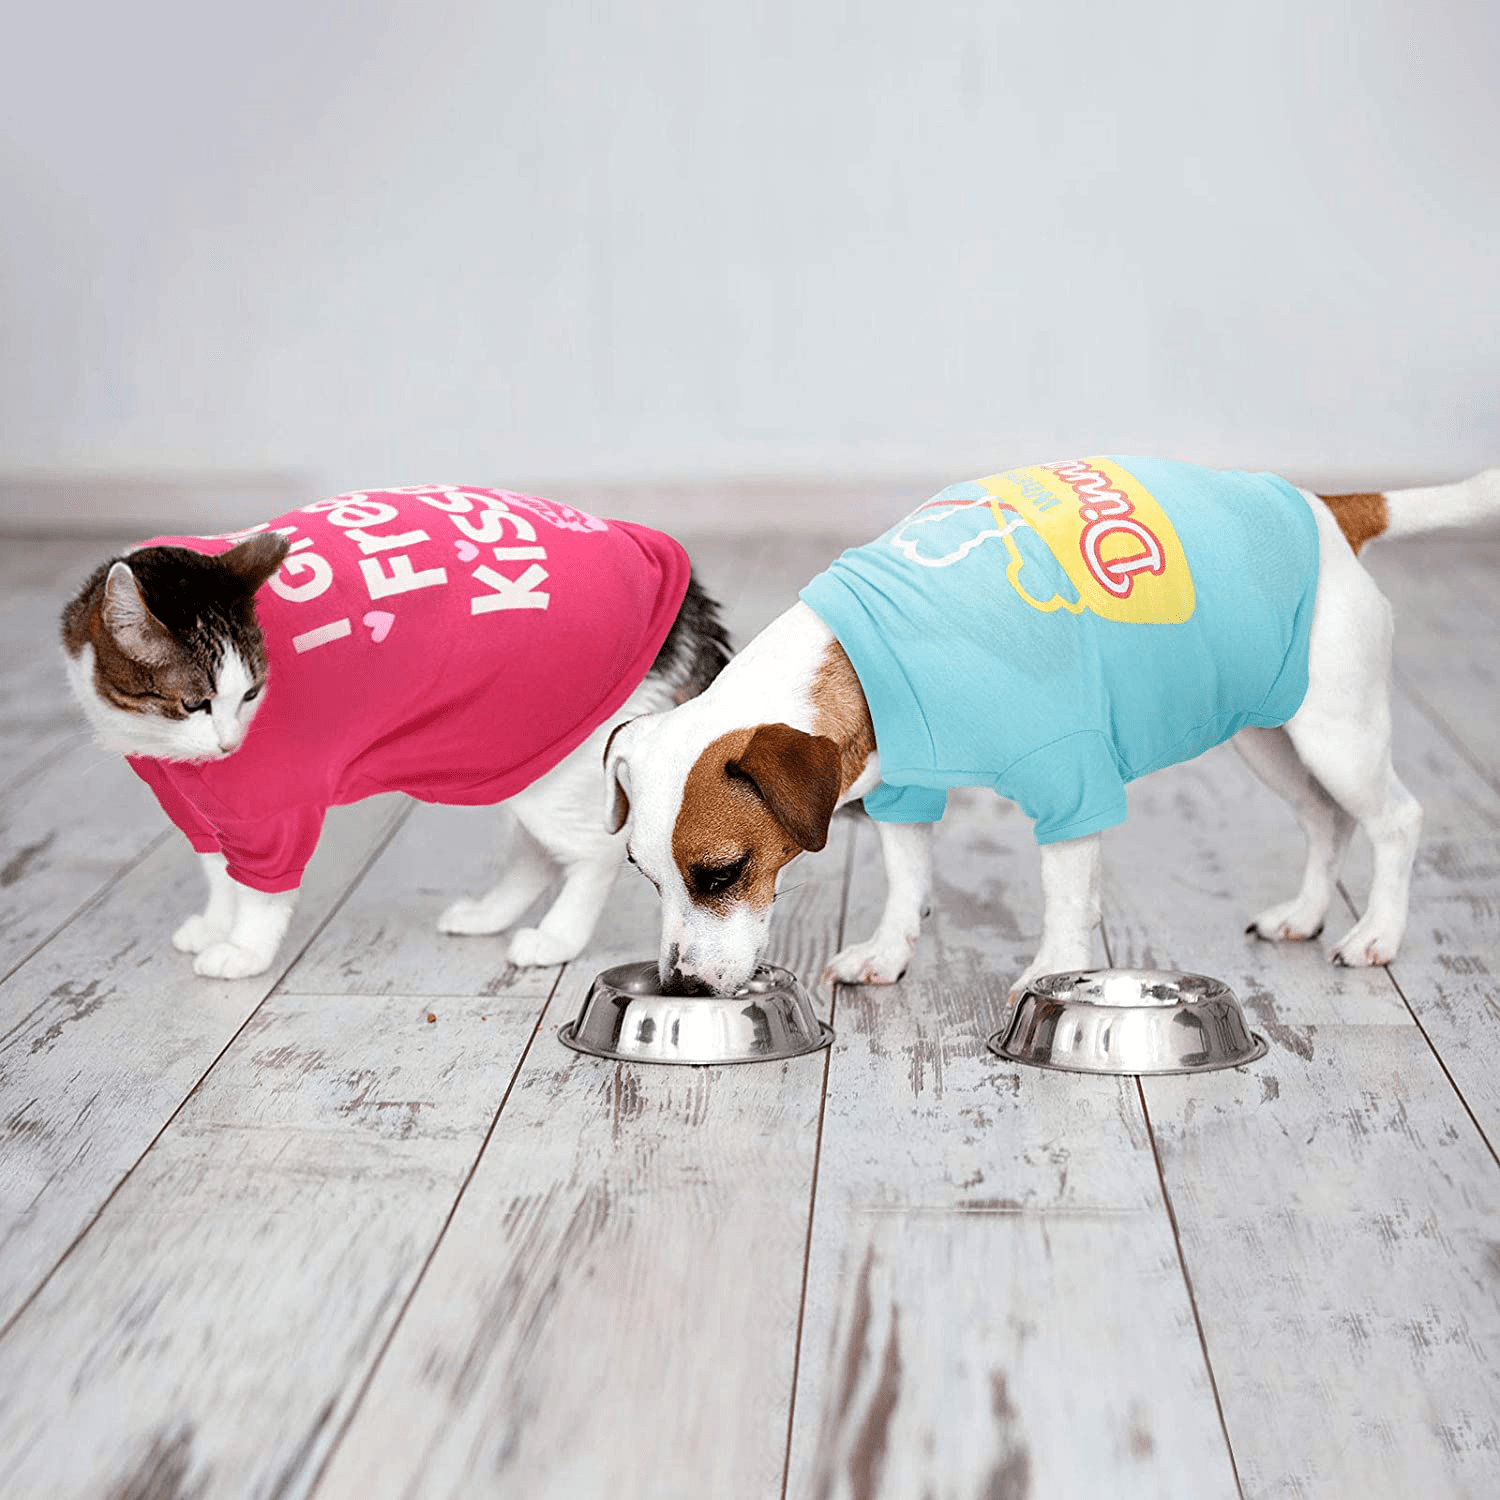 8 Pieces Printed Puppy Dog Shirts Breathable Dog Apparel Soft Puppy Sweatshirt Pet Daily Shirt Colorful Pet Clothing for Dogs and Cats